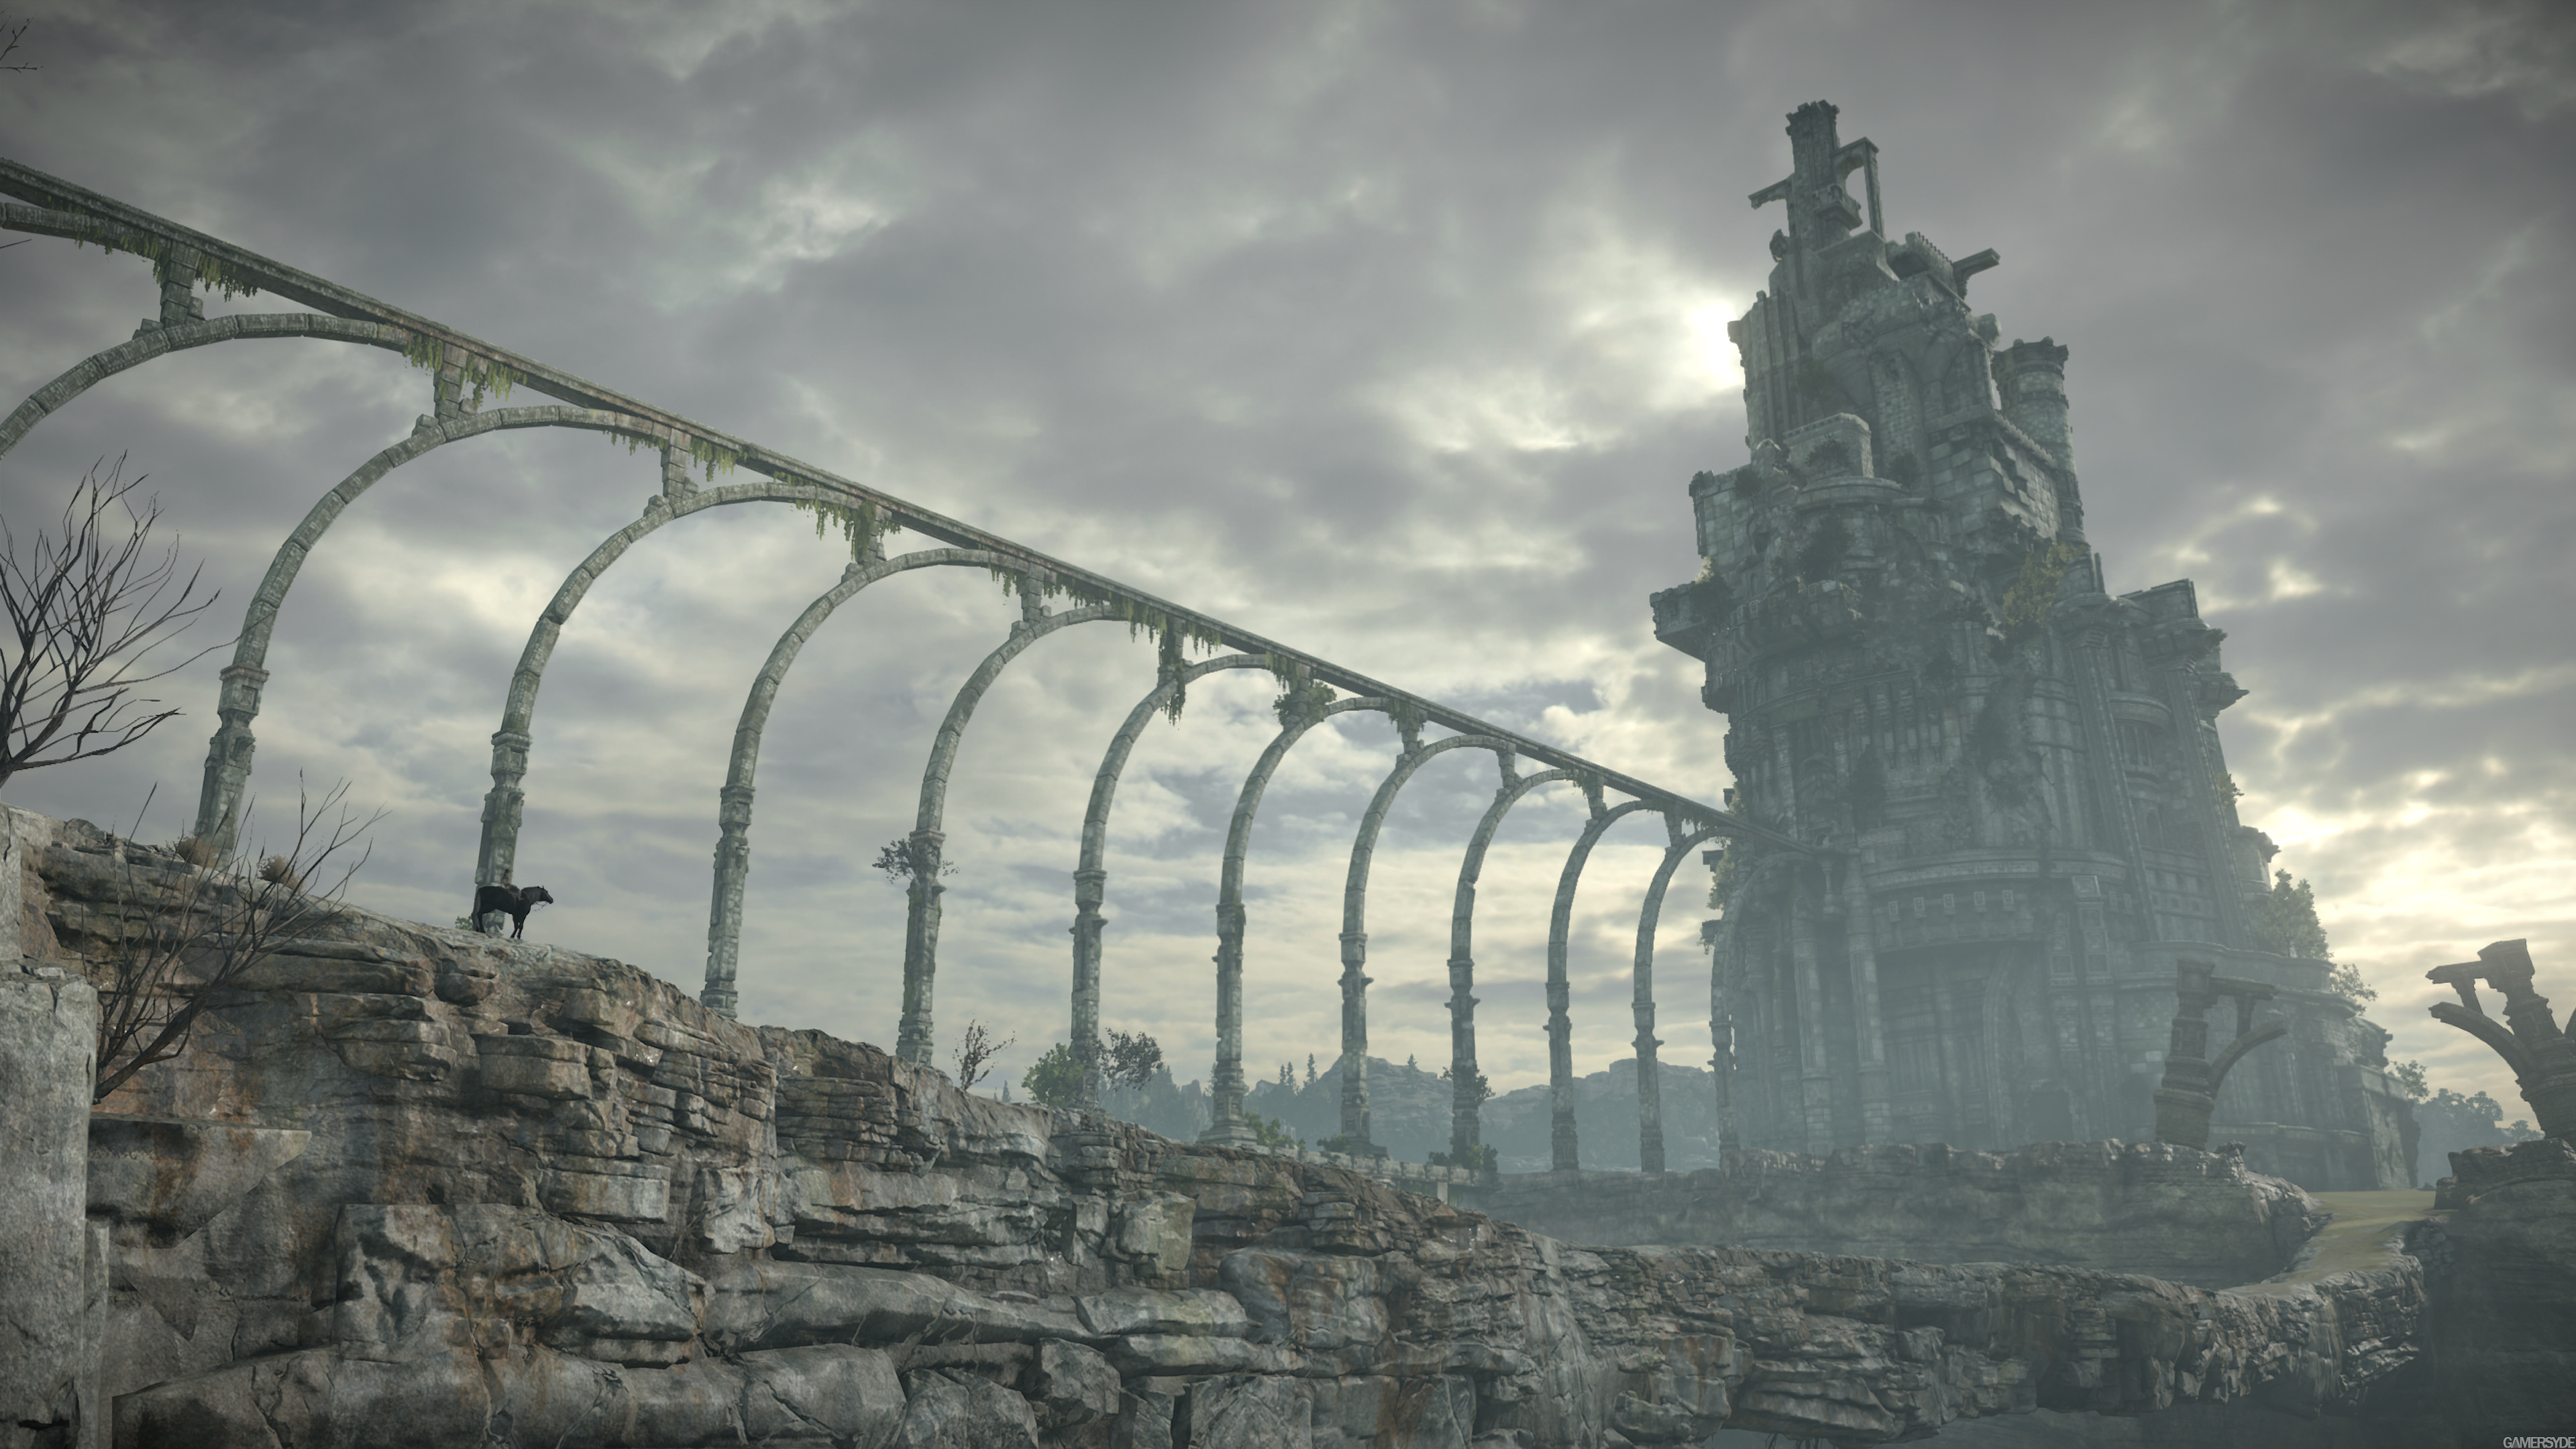 image_shadow_of_the_colossus-35814-910_0005.jpg